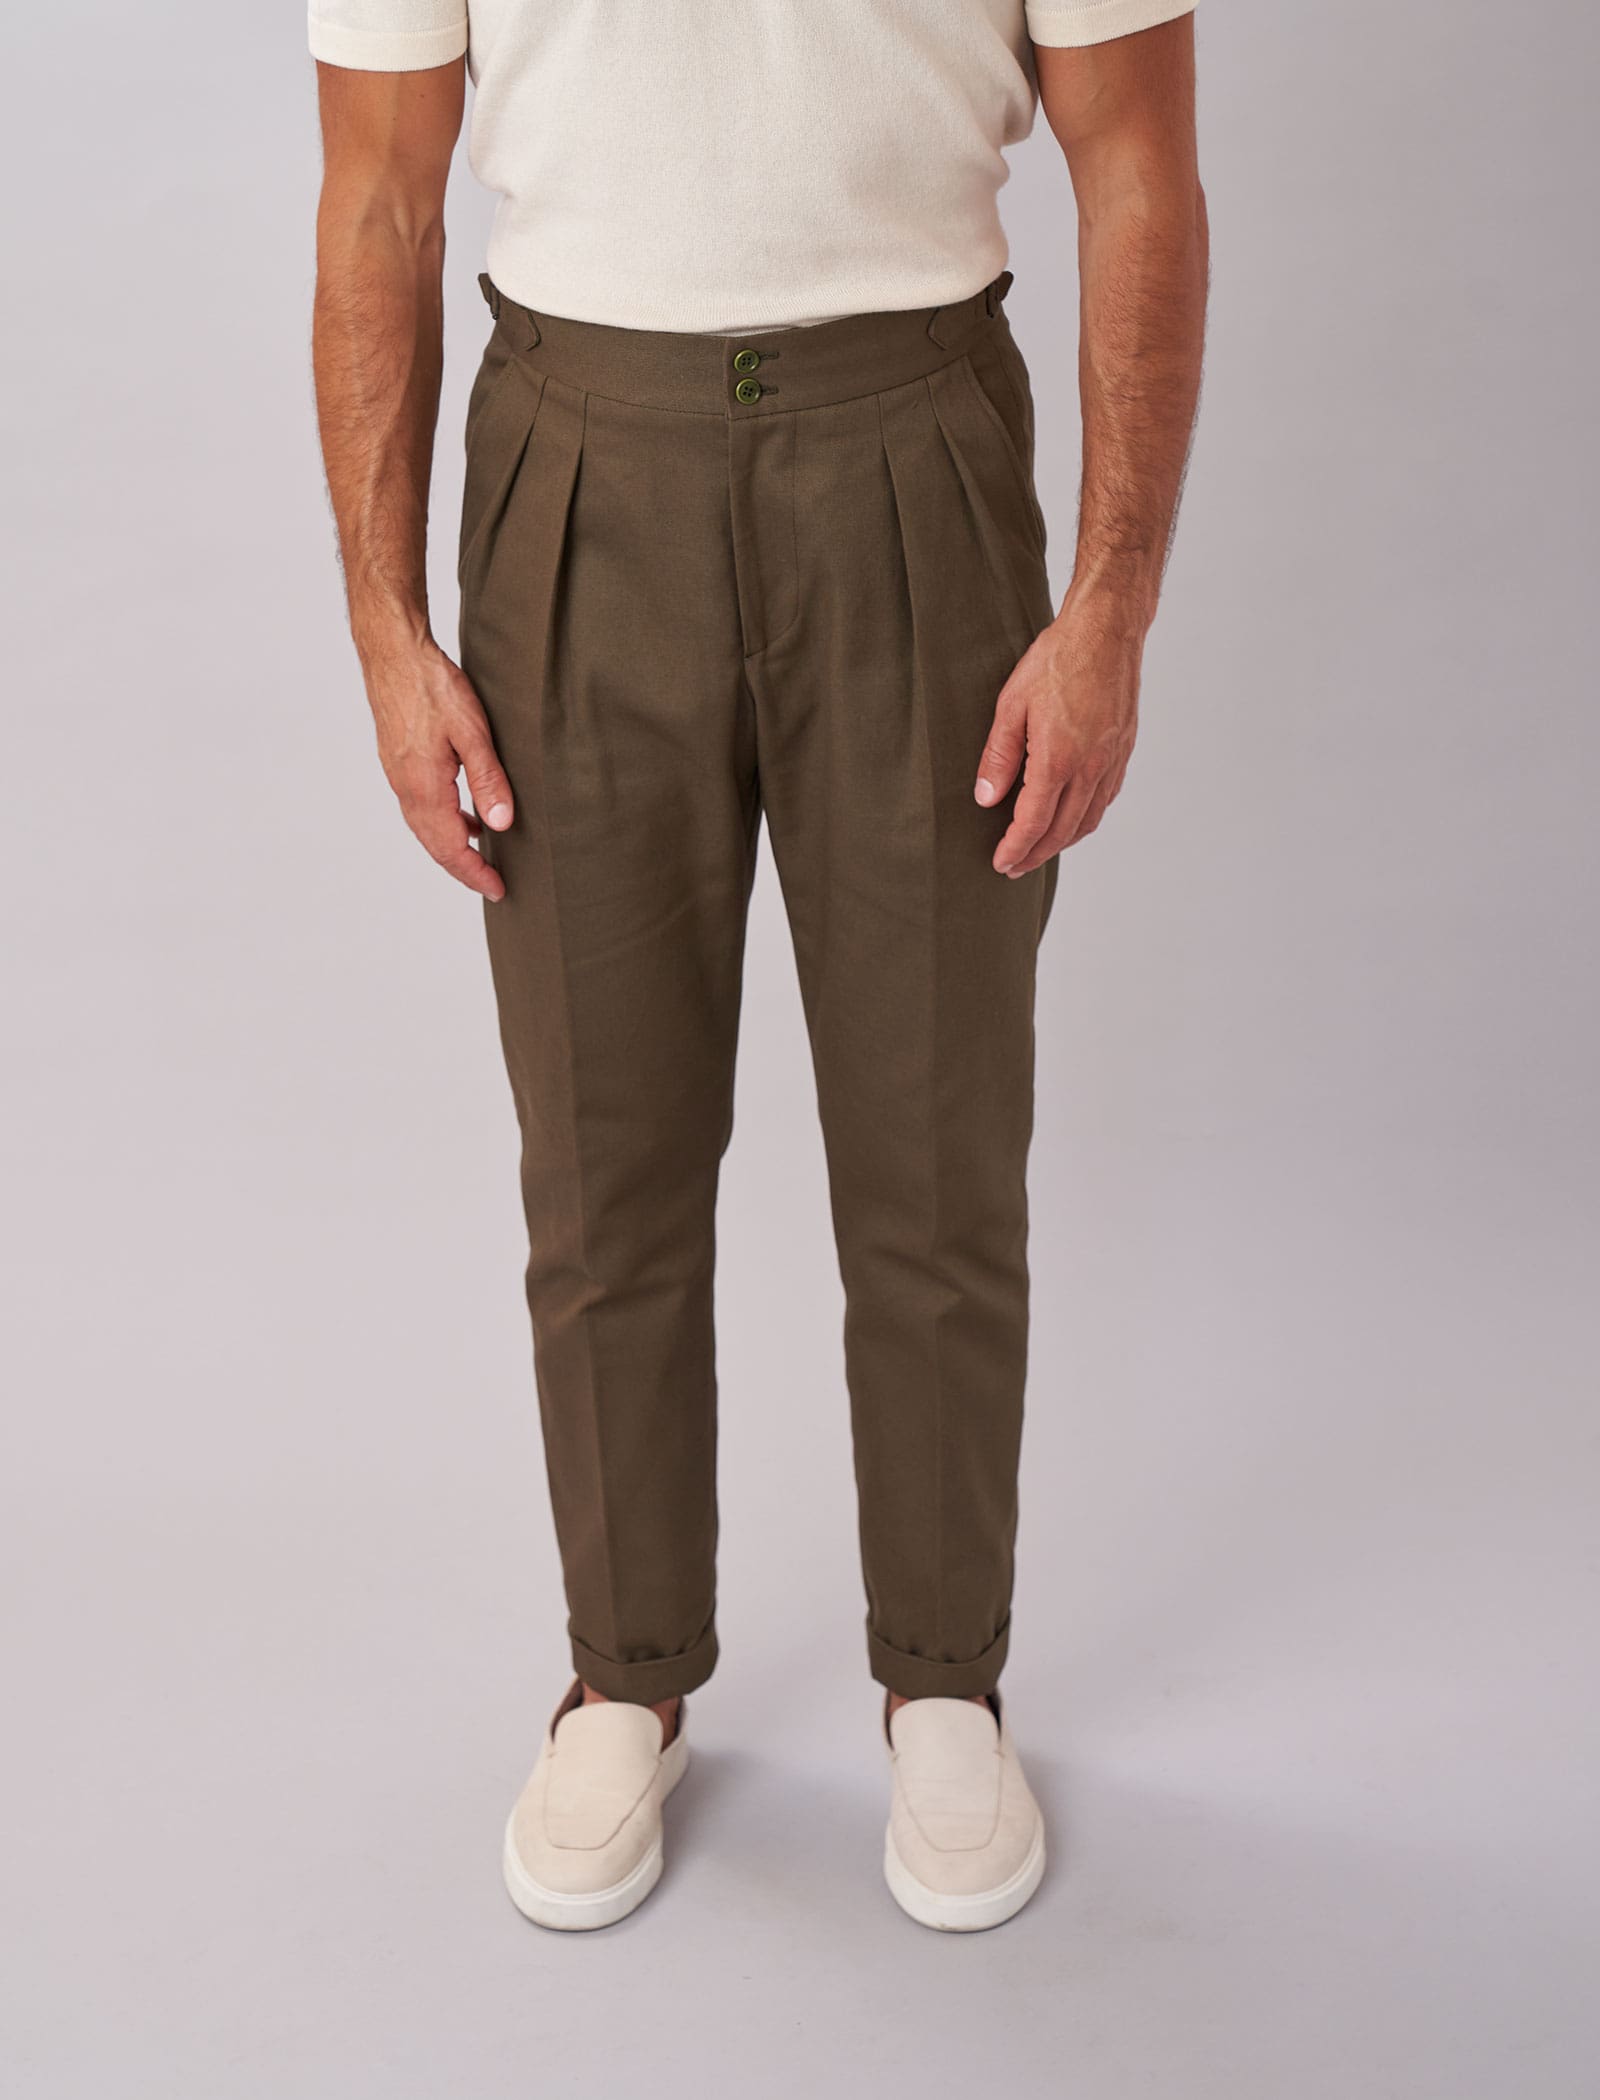 Men's Dark Olive Green Cavalry Twill Cotton High Waisted Trousers